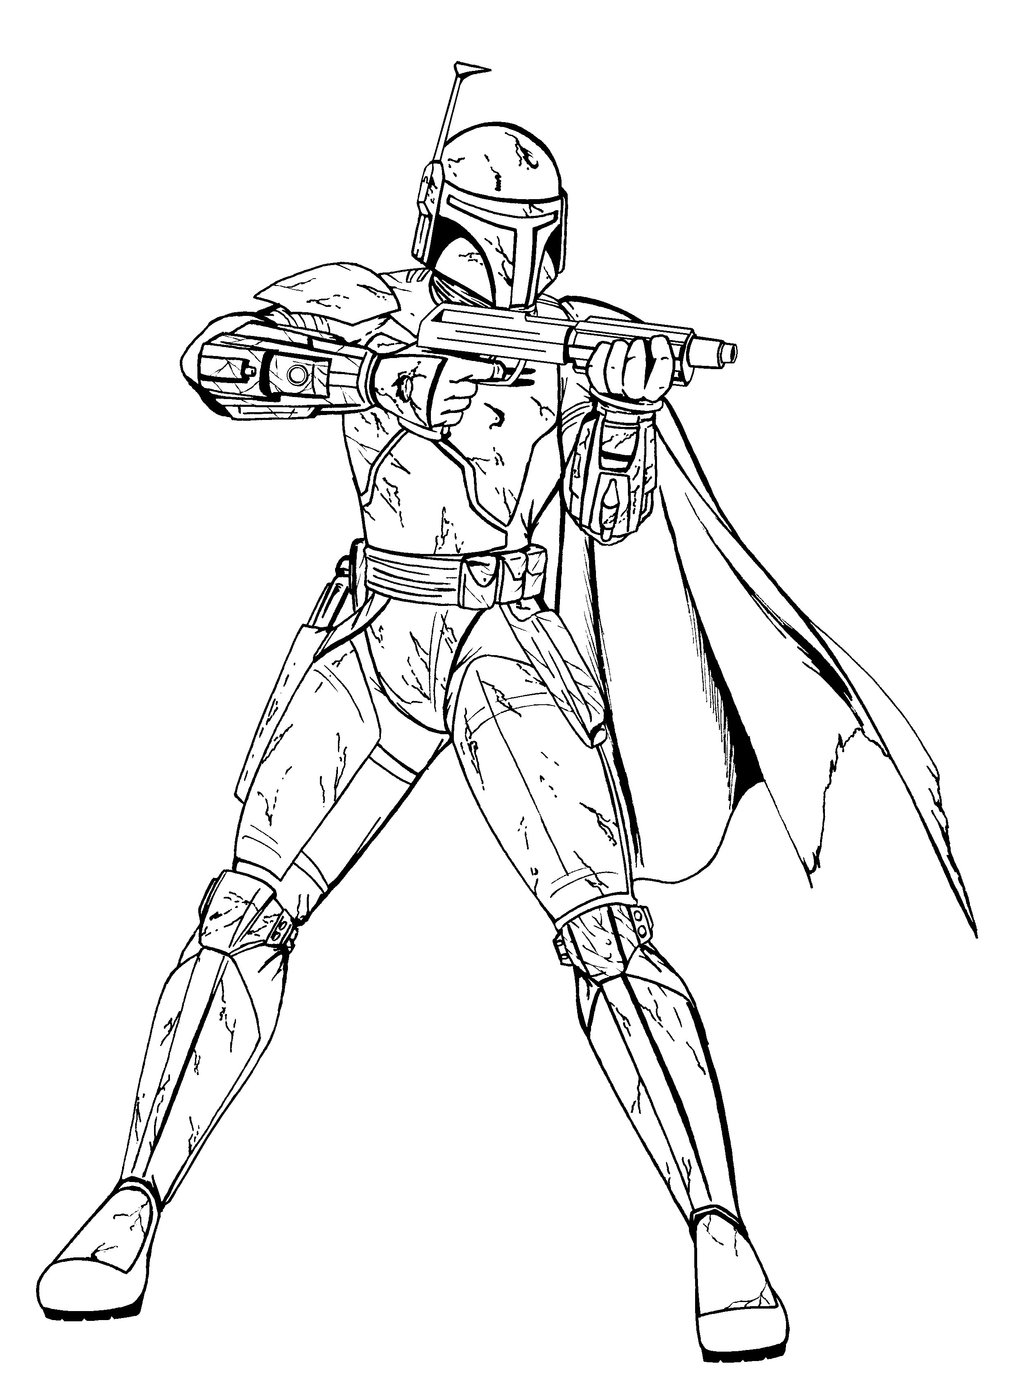 Boba Fett - Star Wars Kids Coloring Pages